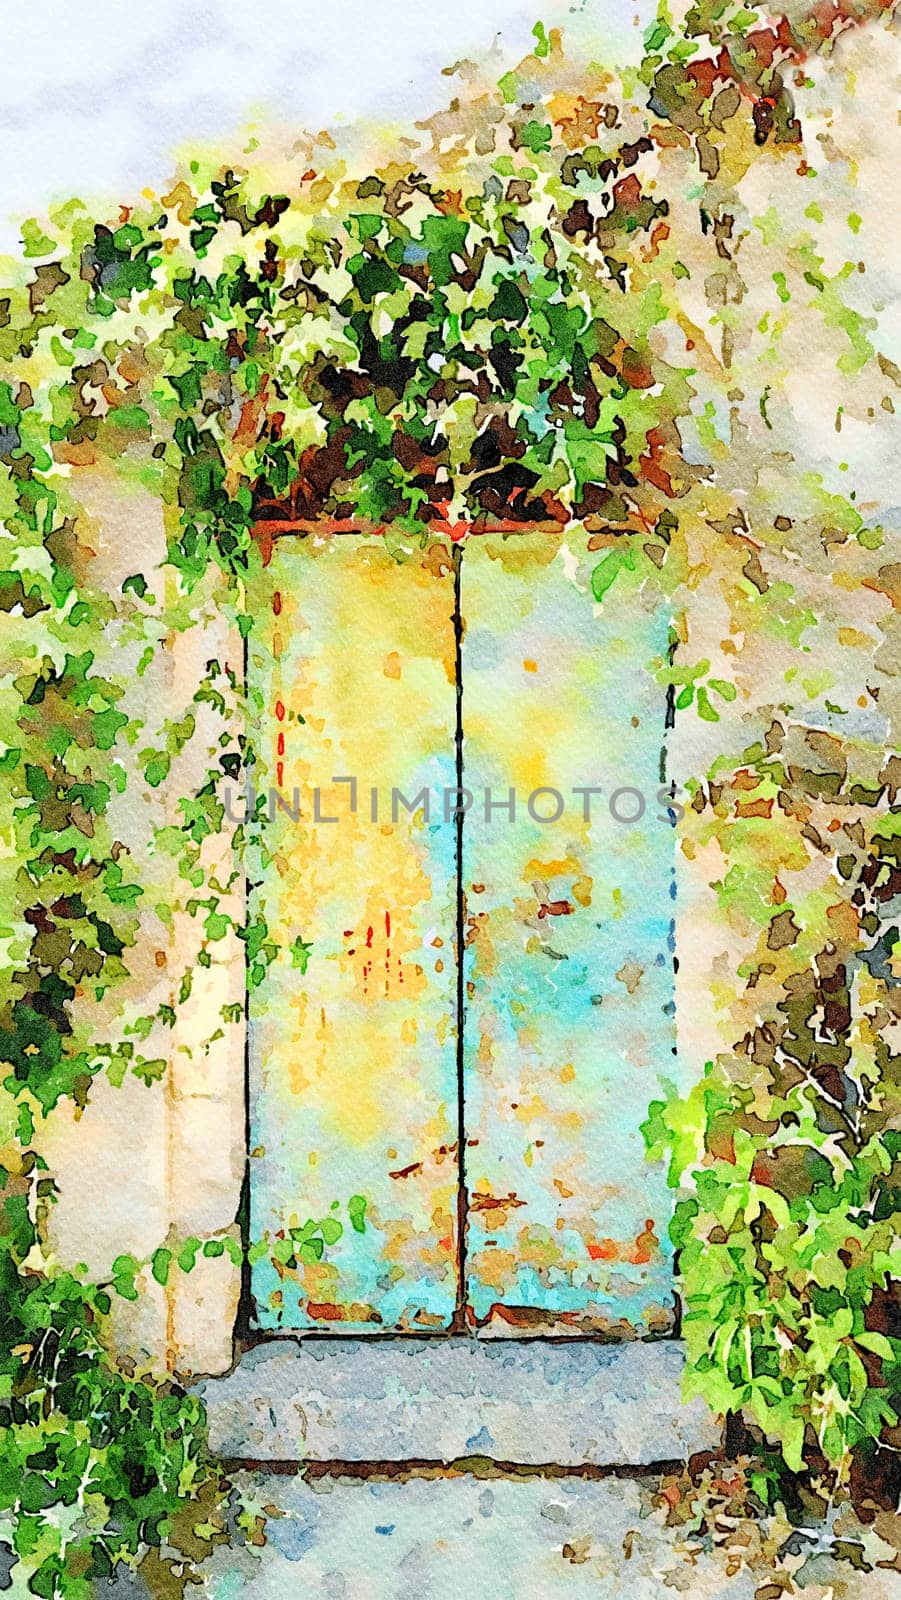 The entrance door with closed metal shutters of an ancient house in southern Europe.